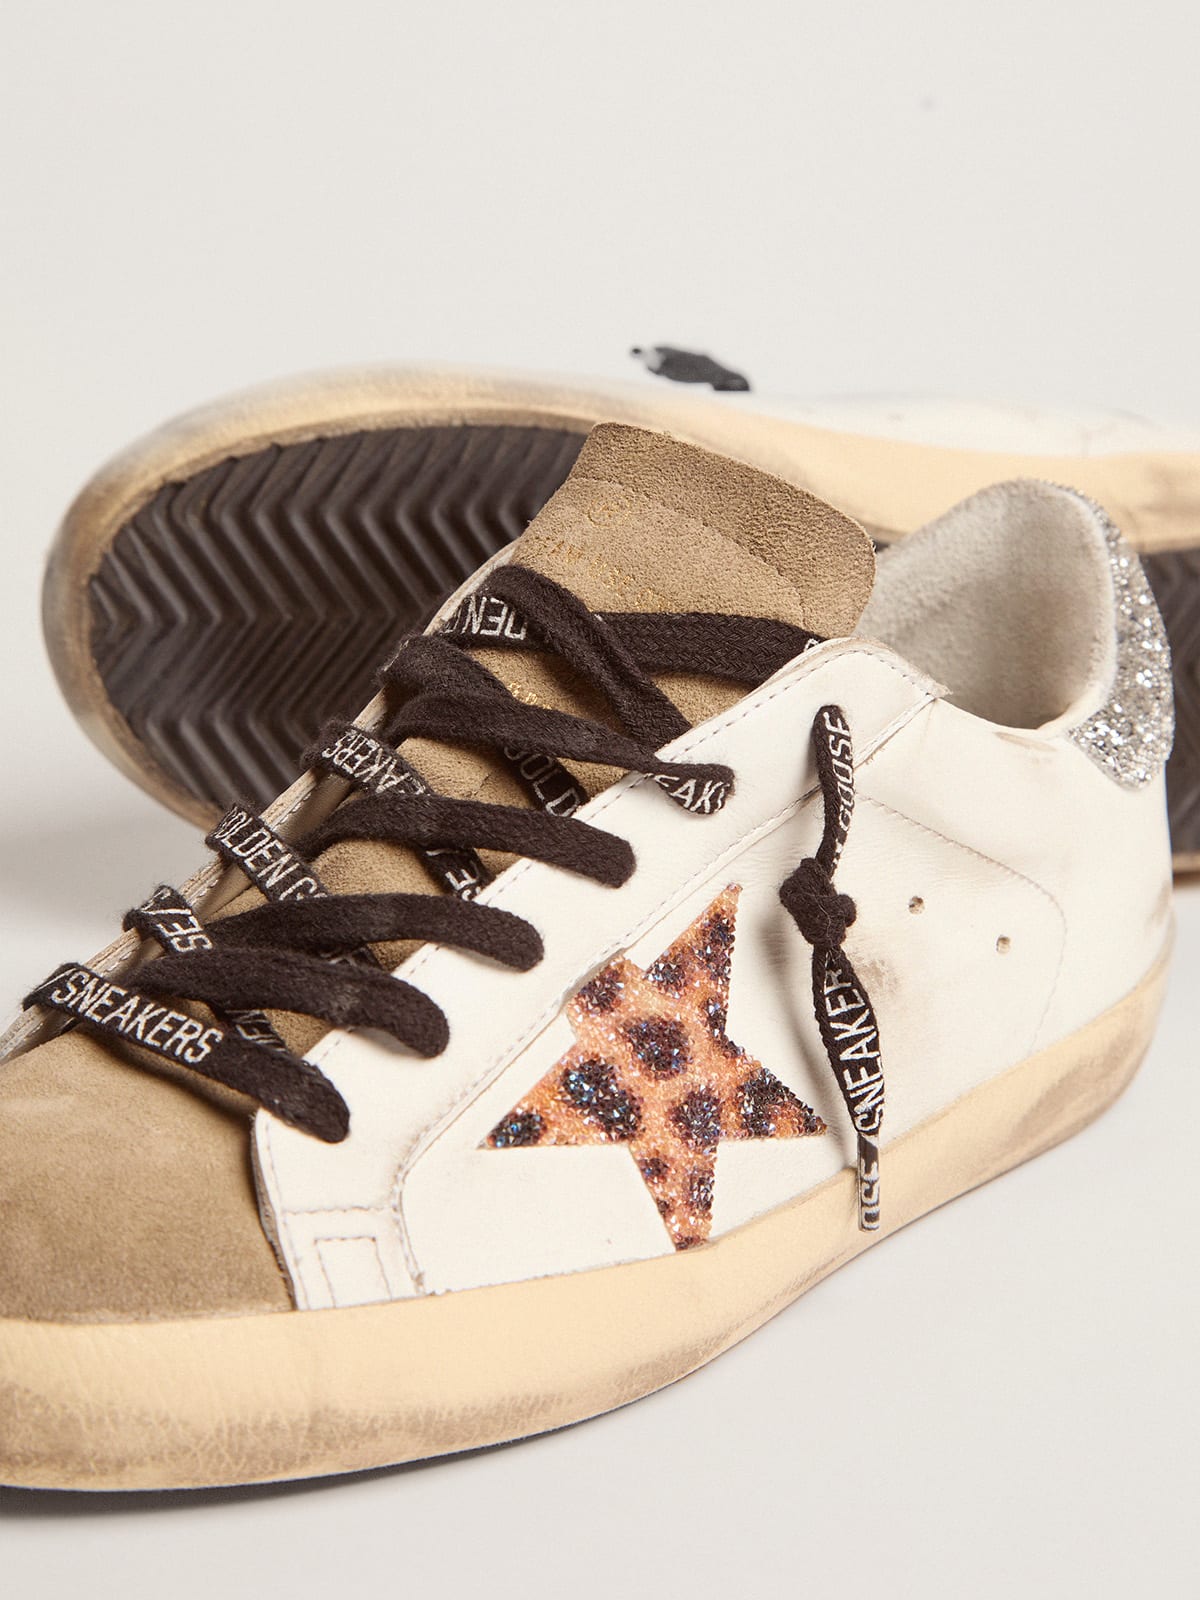 Golden Goose - Super-Star with leopard-print crystal star and silver heel tab in 